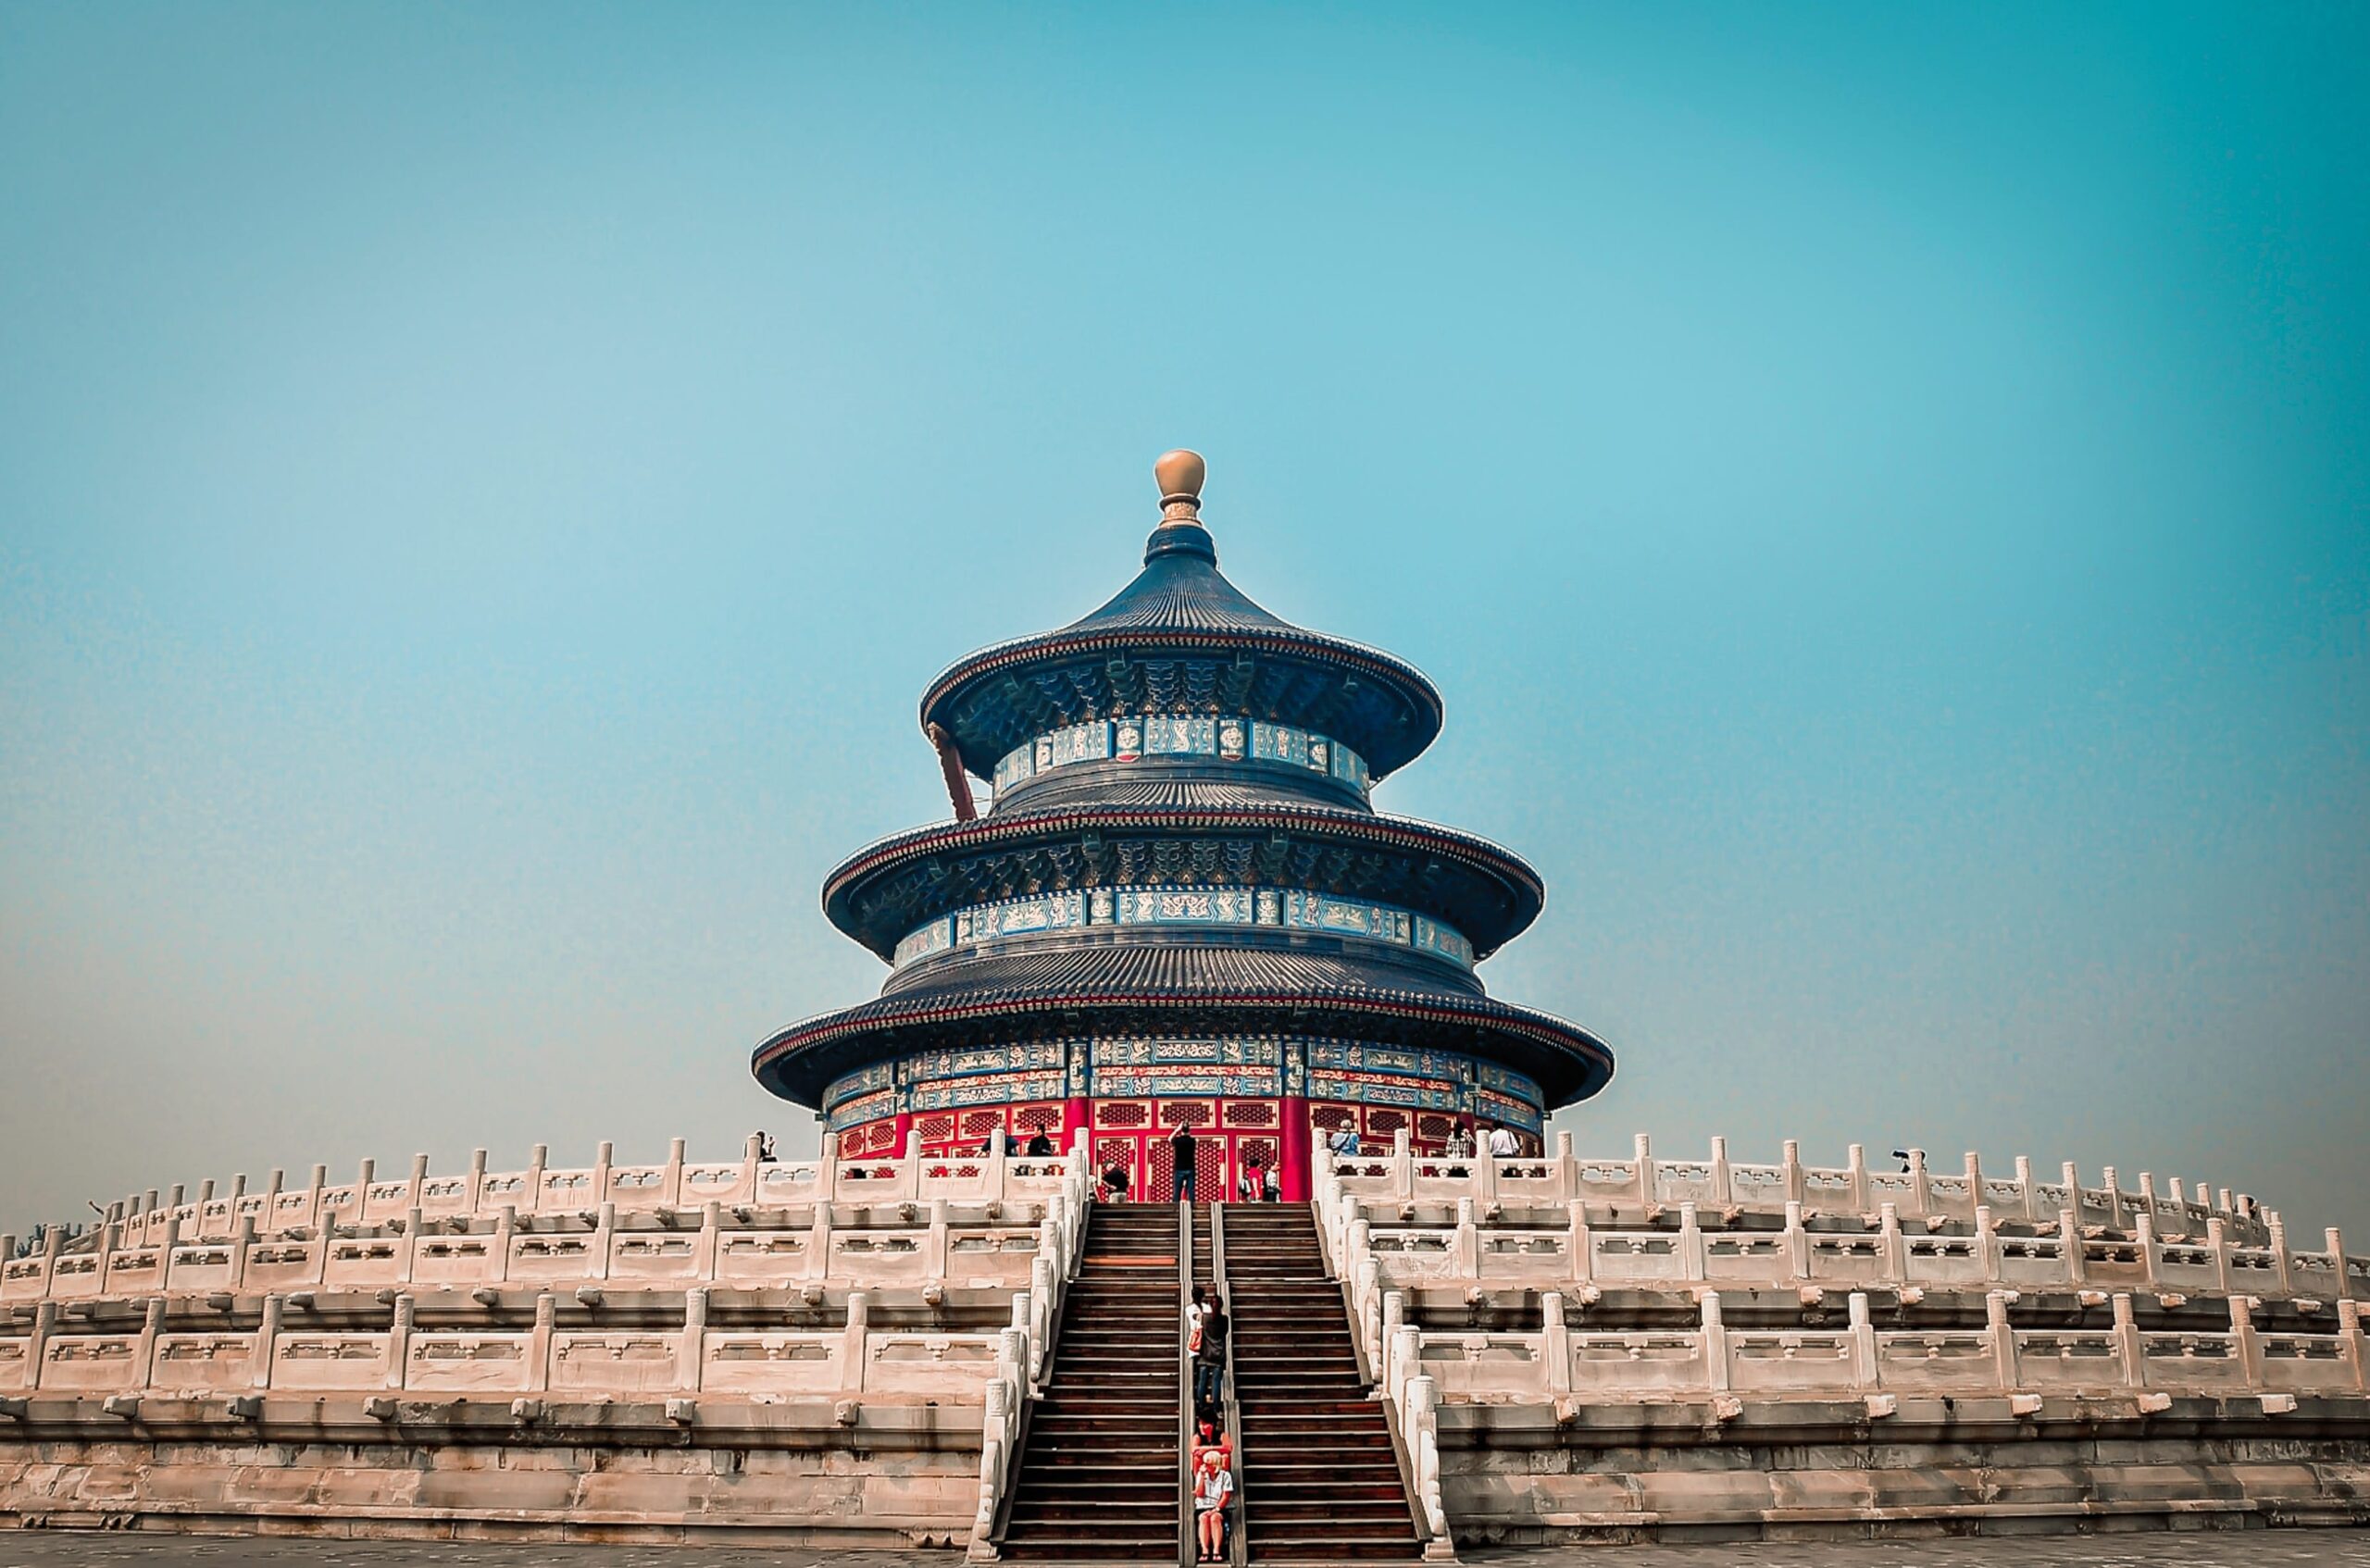 The Temple of Heaven, Beijing, China